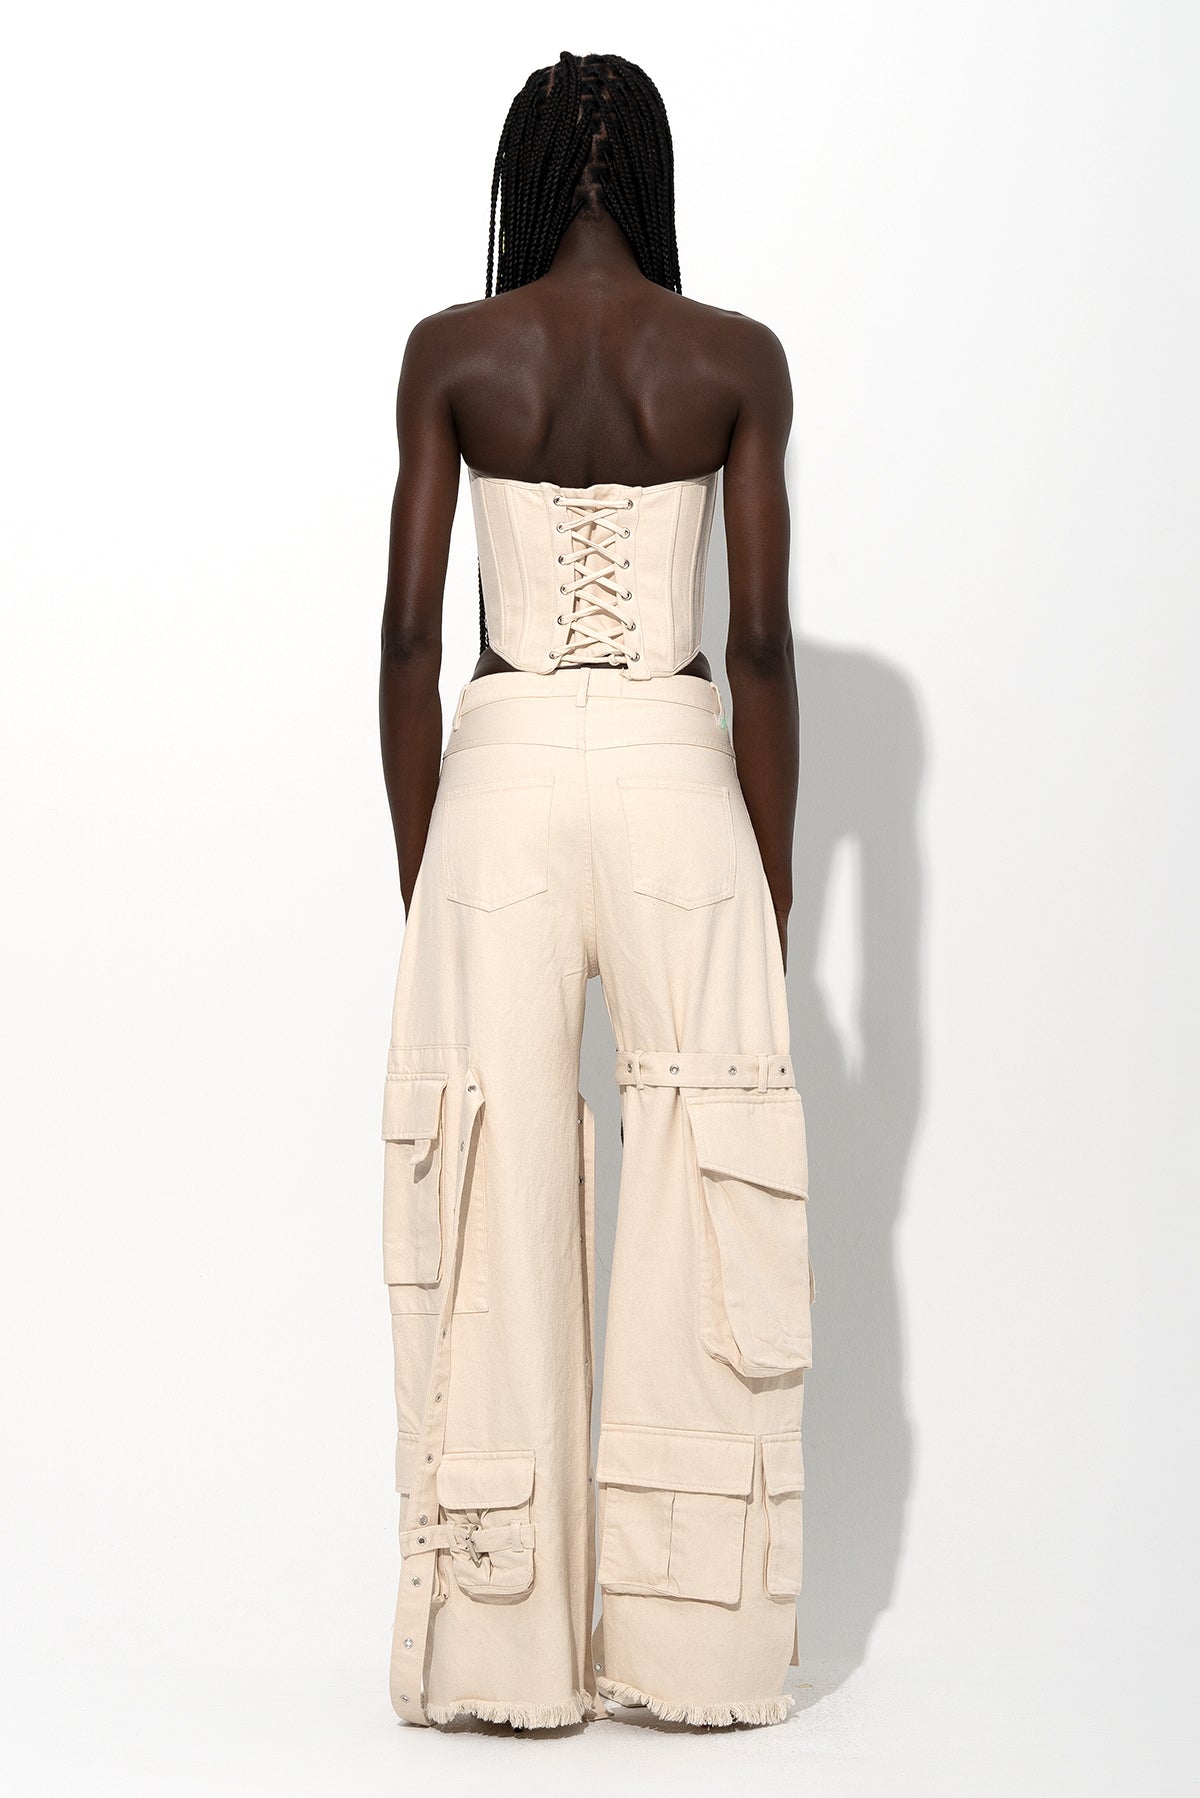 OFF-WHITE MULTIPOCKET CARGO TROUSERS marques almeida